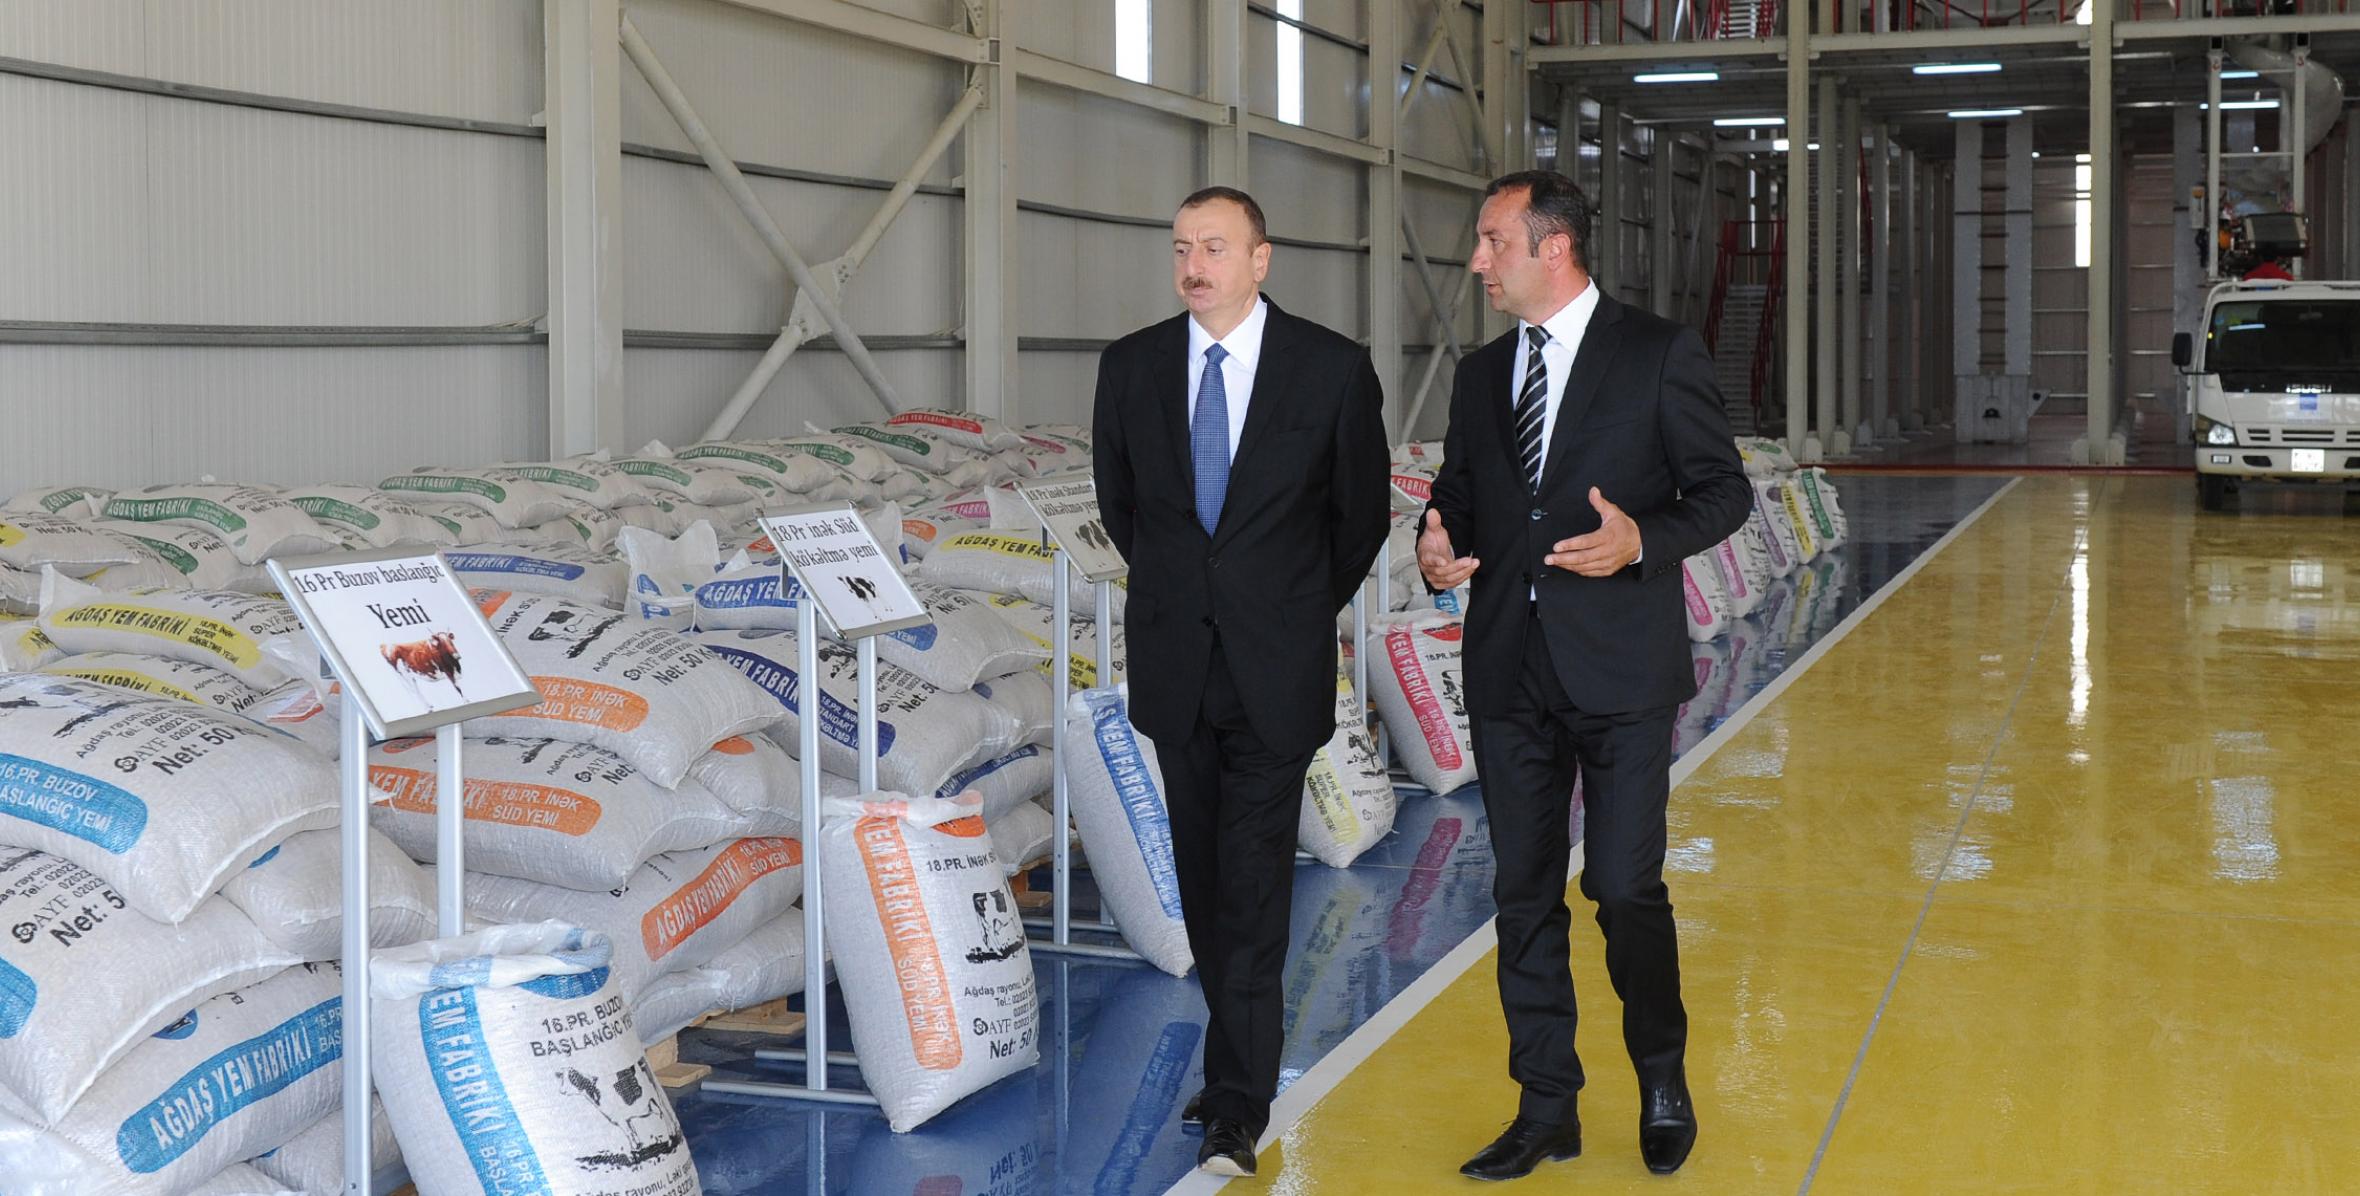 As part of a visit to Agdash District, Ilham Aliyev attended the opening ceremony of a Gilan feed processing factory